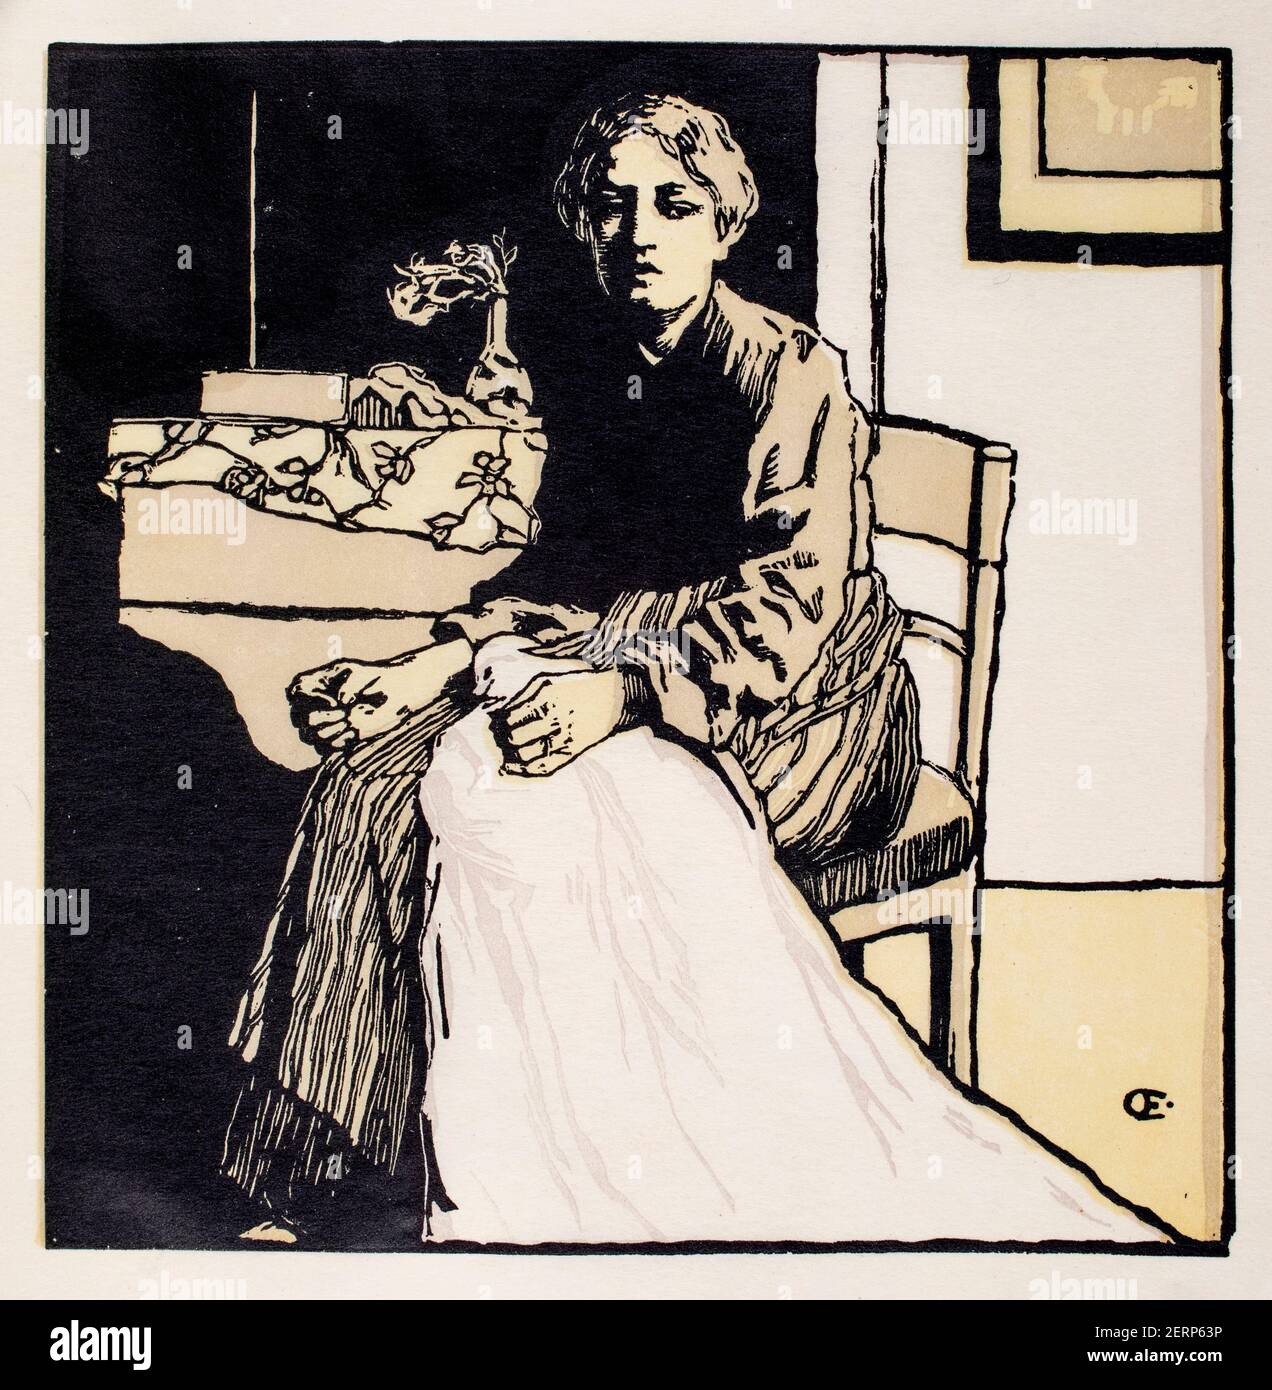 The seamstress, Chromo xylograph (Colour woodblock print) by Prague born painter, etcher and lithographer Emil Orlik from 1900 The Studio an Illustrat Stock Photo